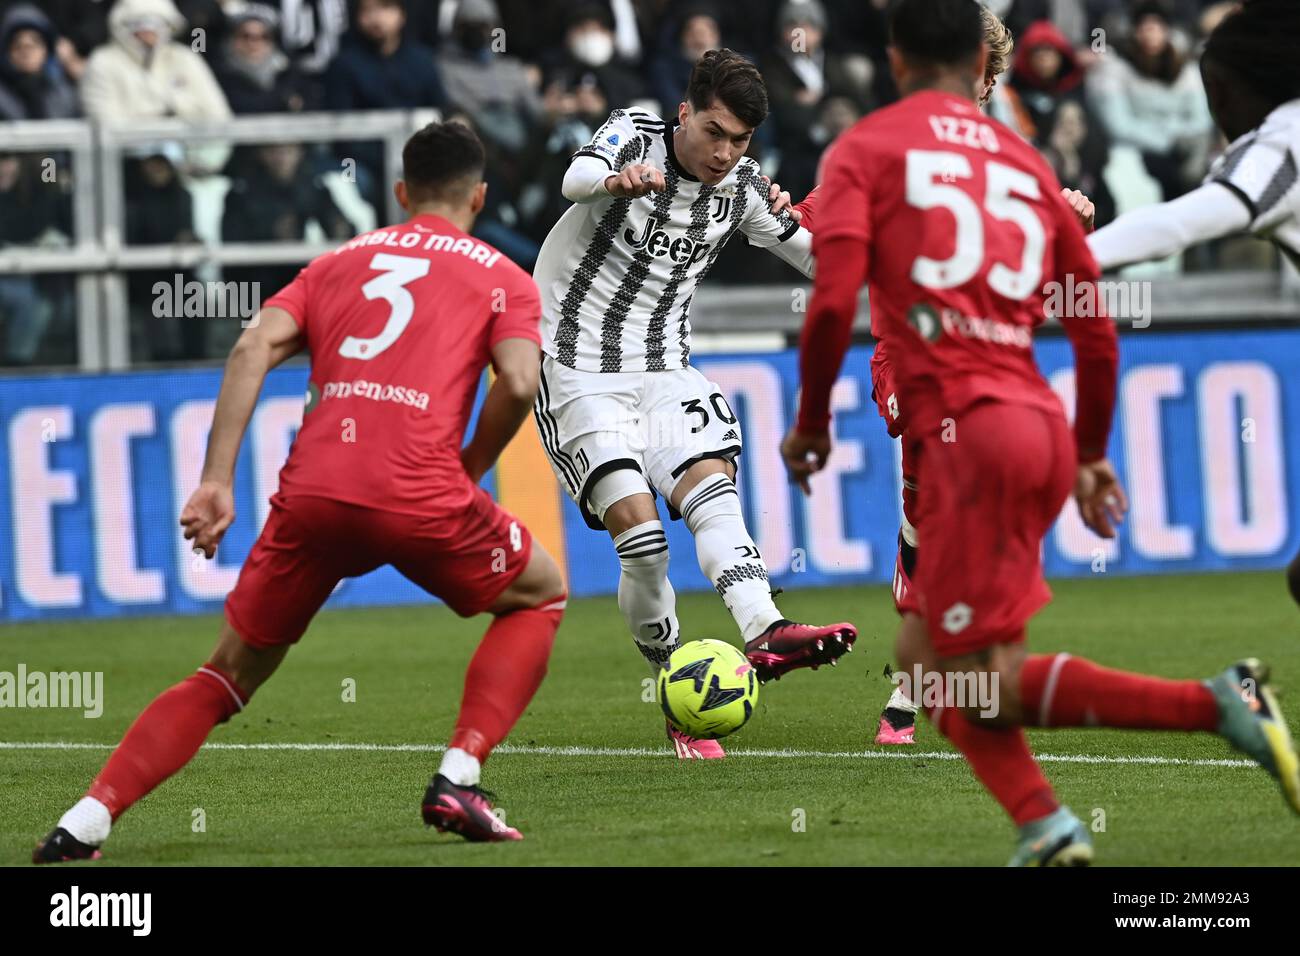 Around Turin - Full-Time: Juventus U23 1-0 Cuneo. The B team won their  first official game in the Italian Cup Serie C. @khaledalnouss1